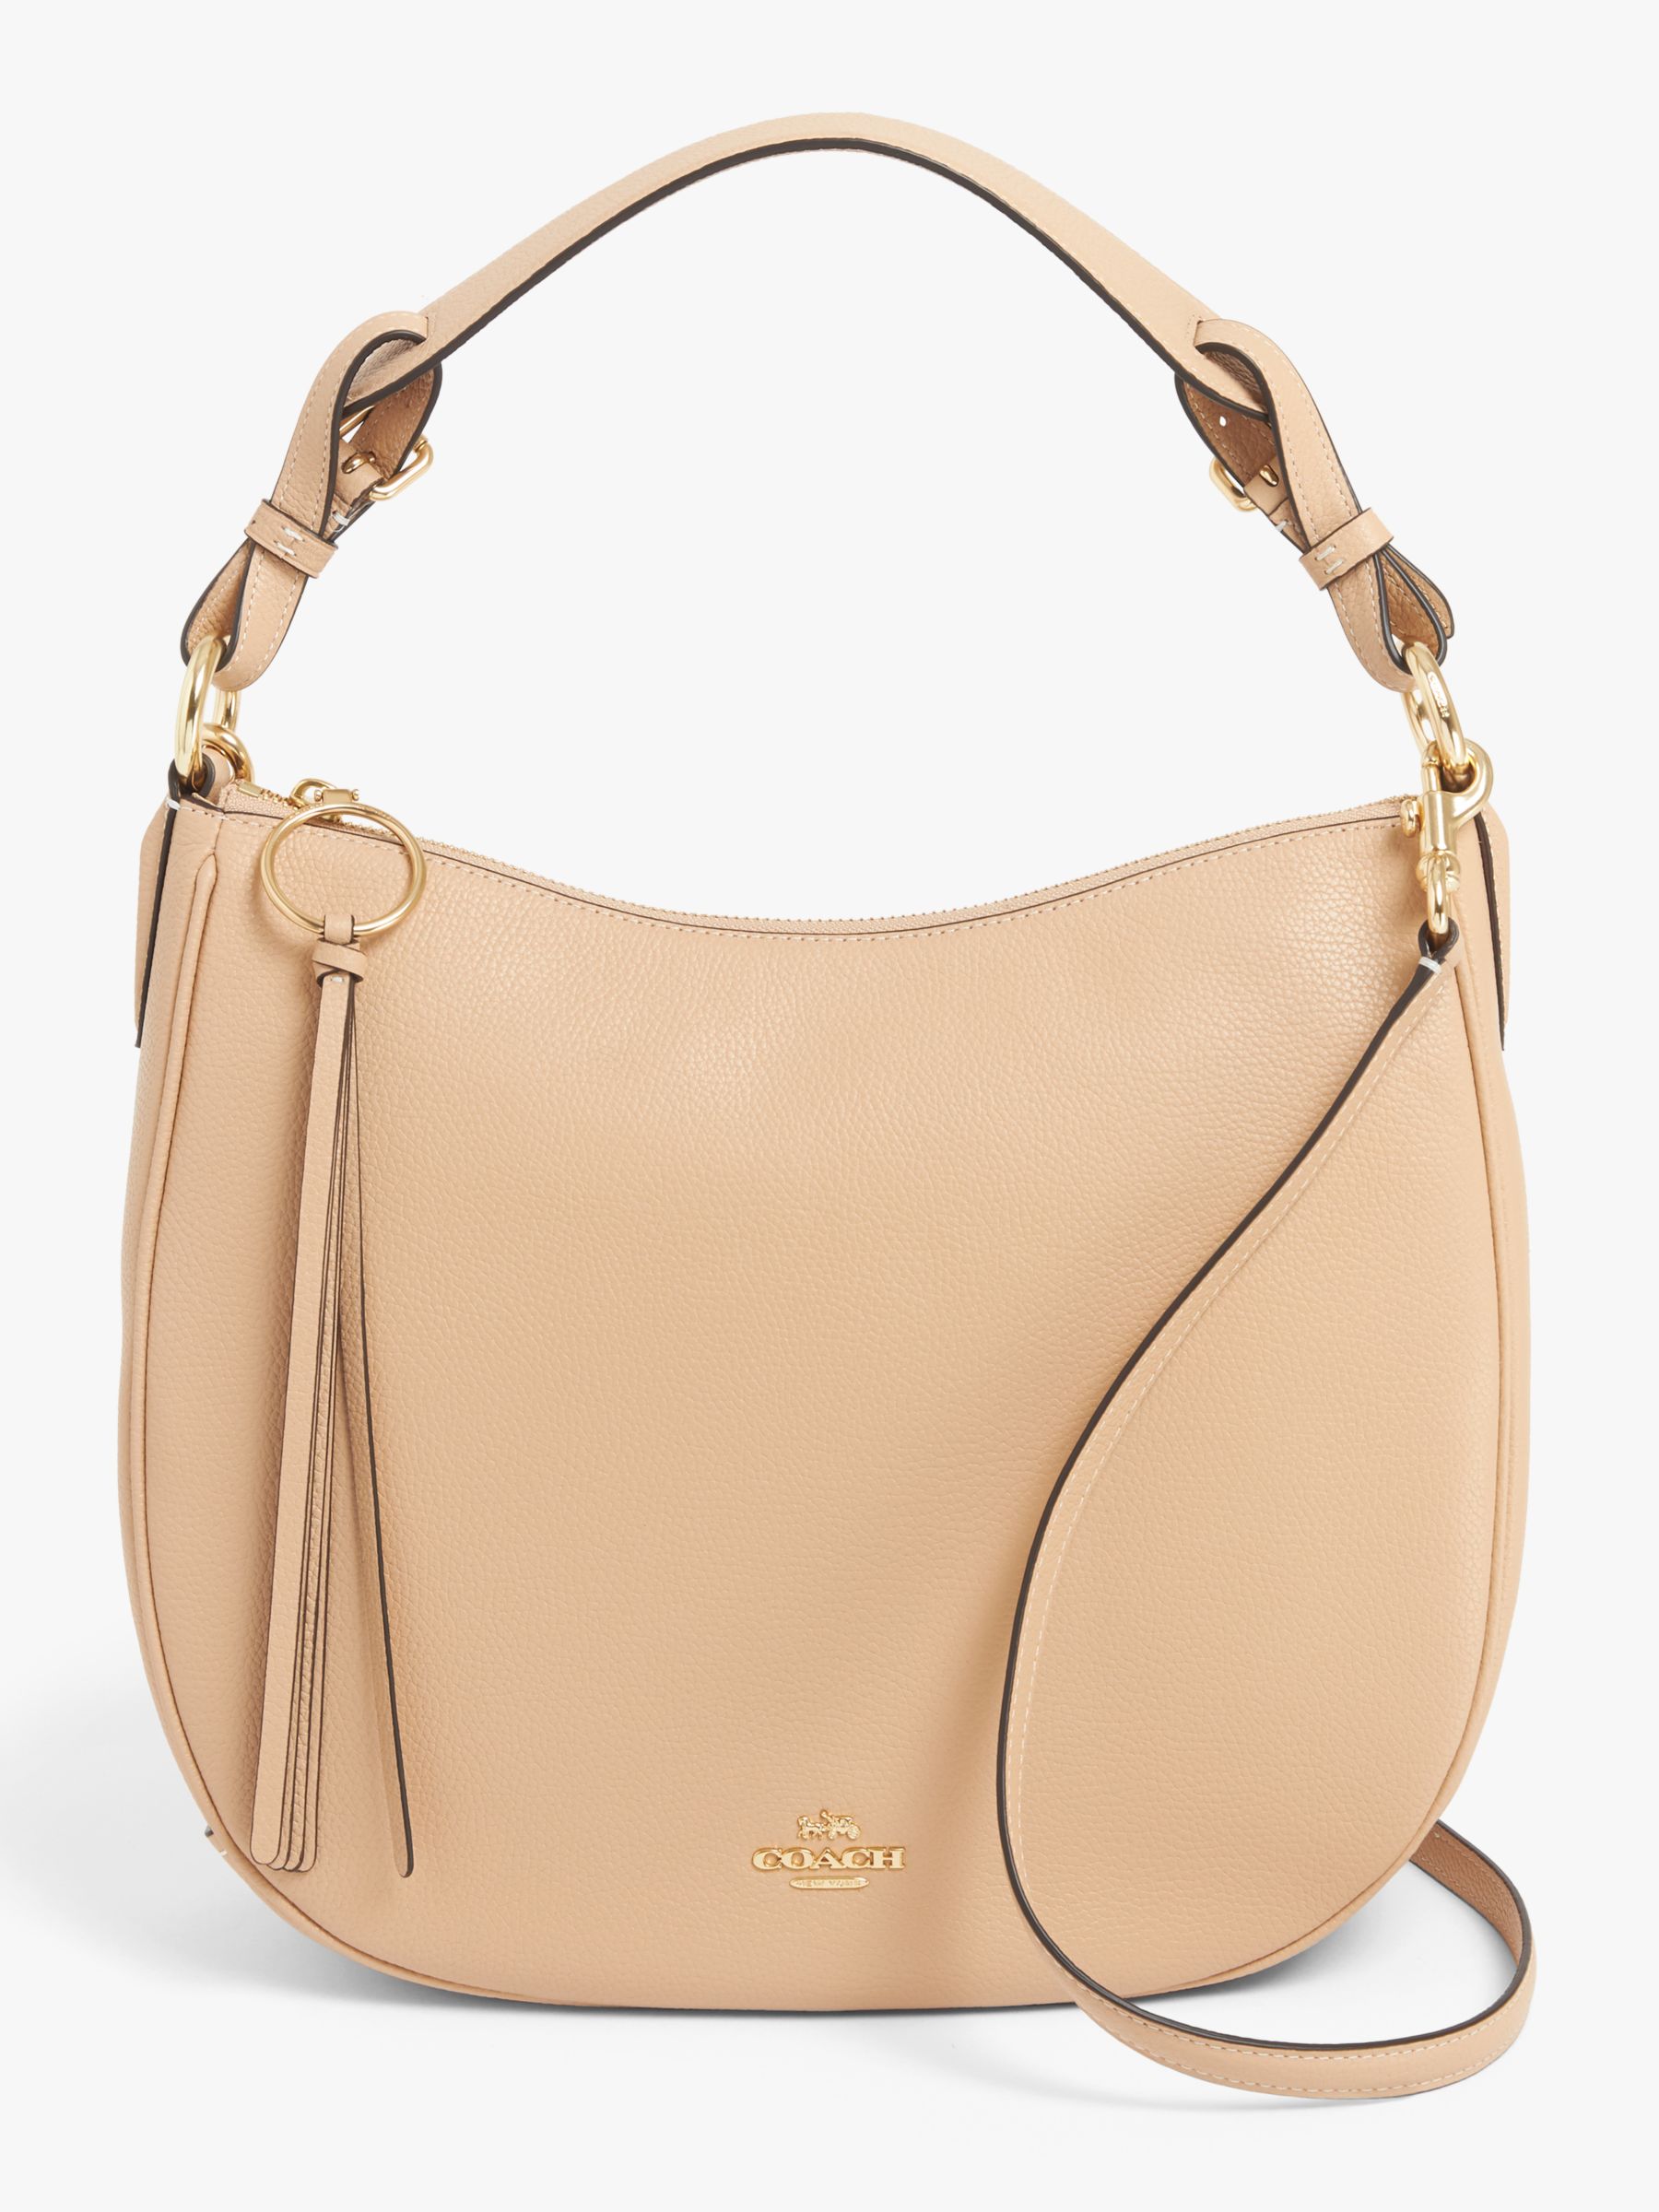 Coach Sutton Pebbled Leather Hobo Bag, Gold/Beechwood at John Lewis & Partners